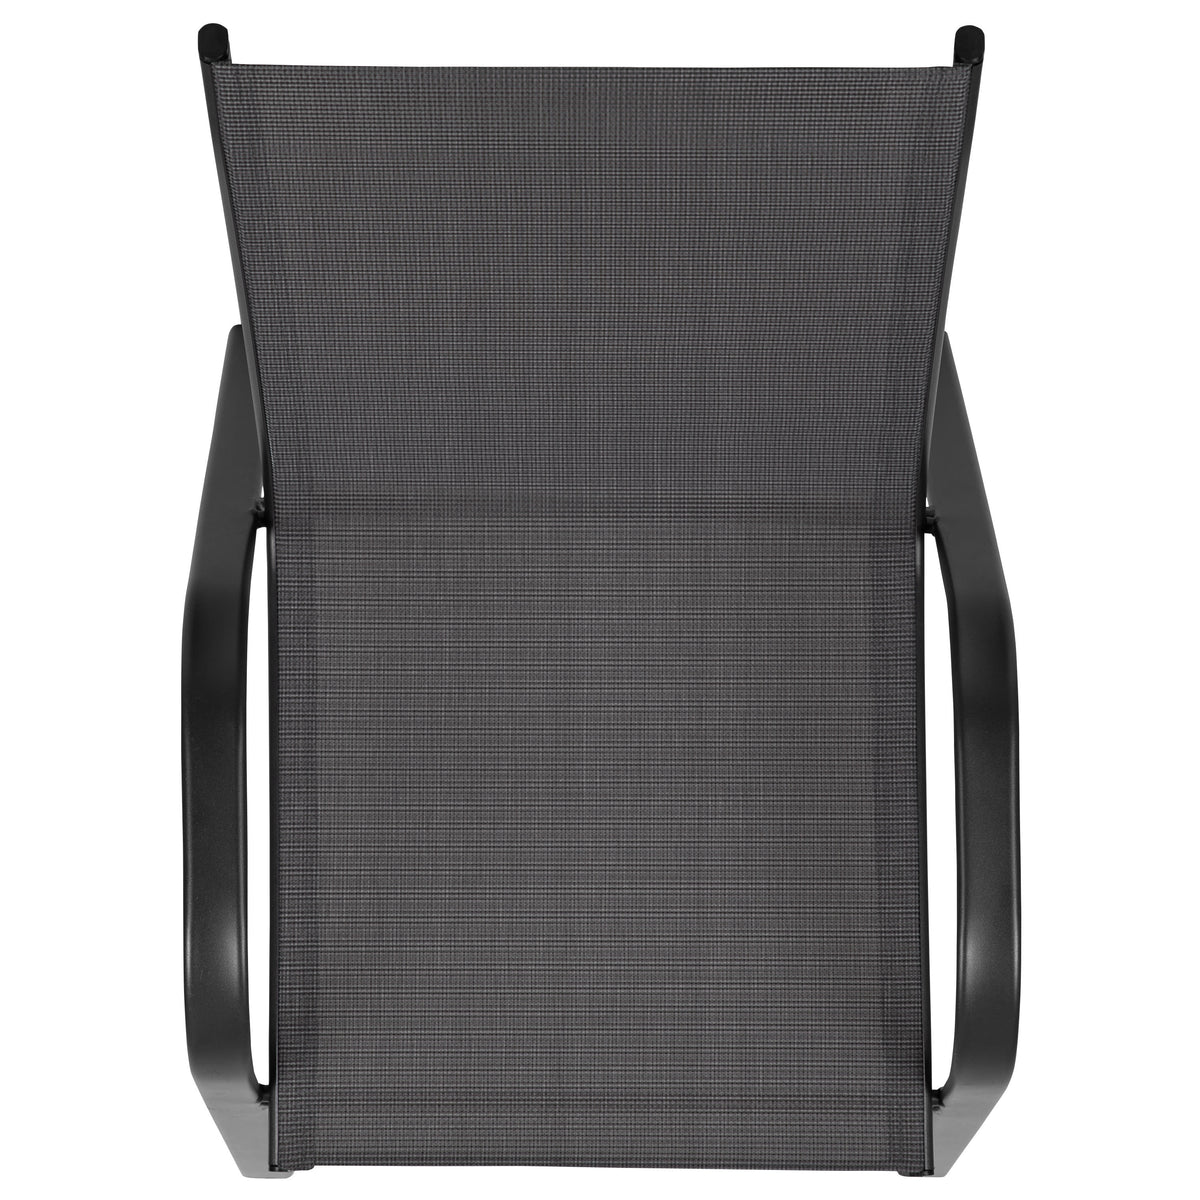 Black |#| Black Outdoor Stack Chair with Flex Comfort Material - Patio Stack Chair